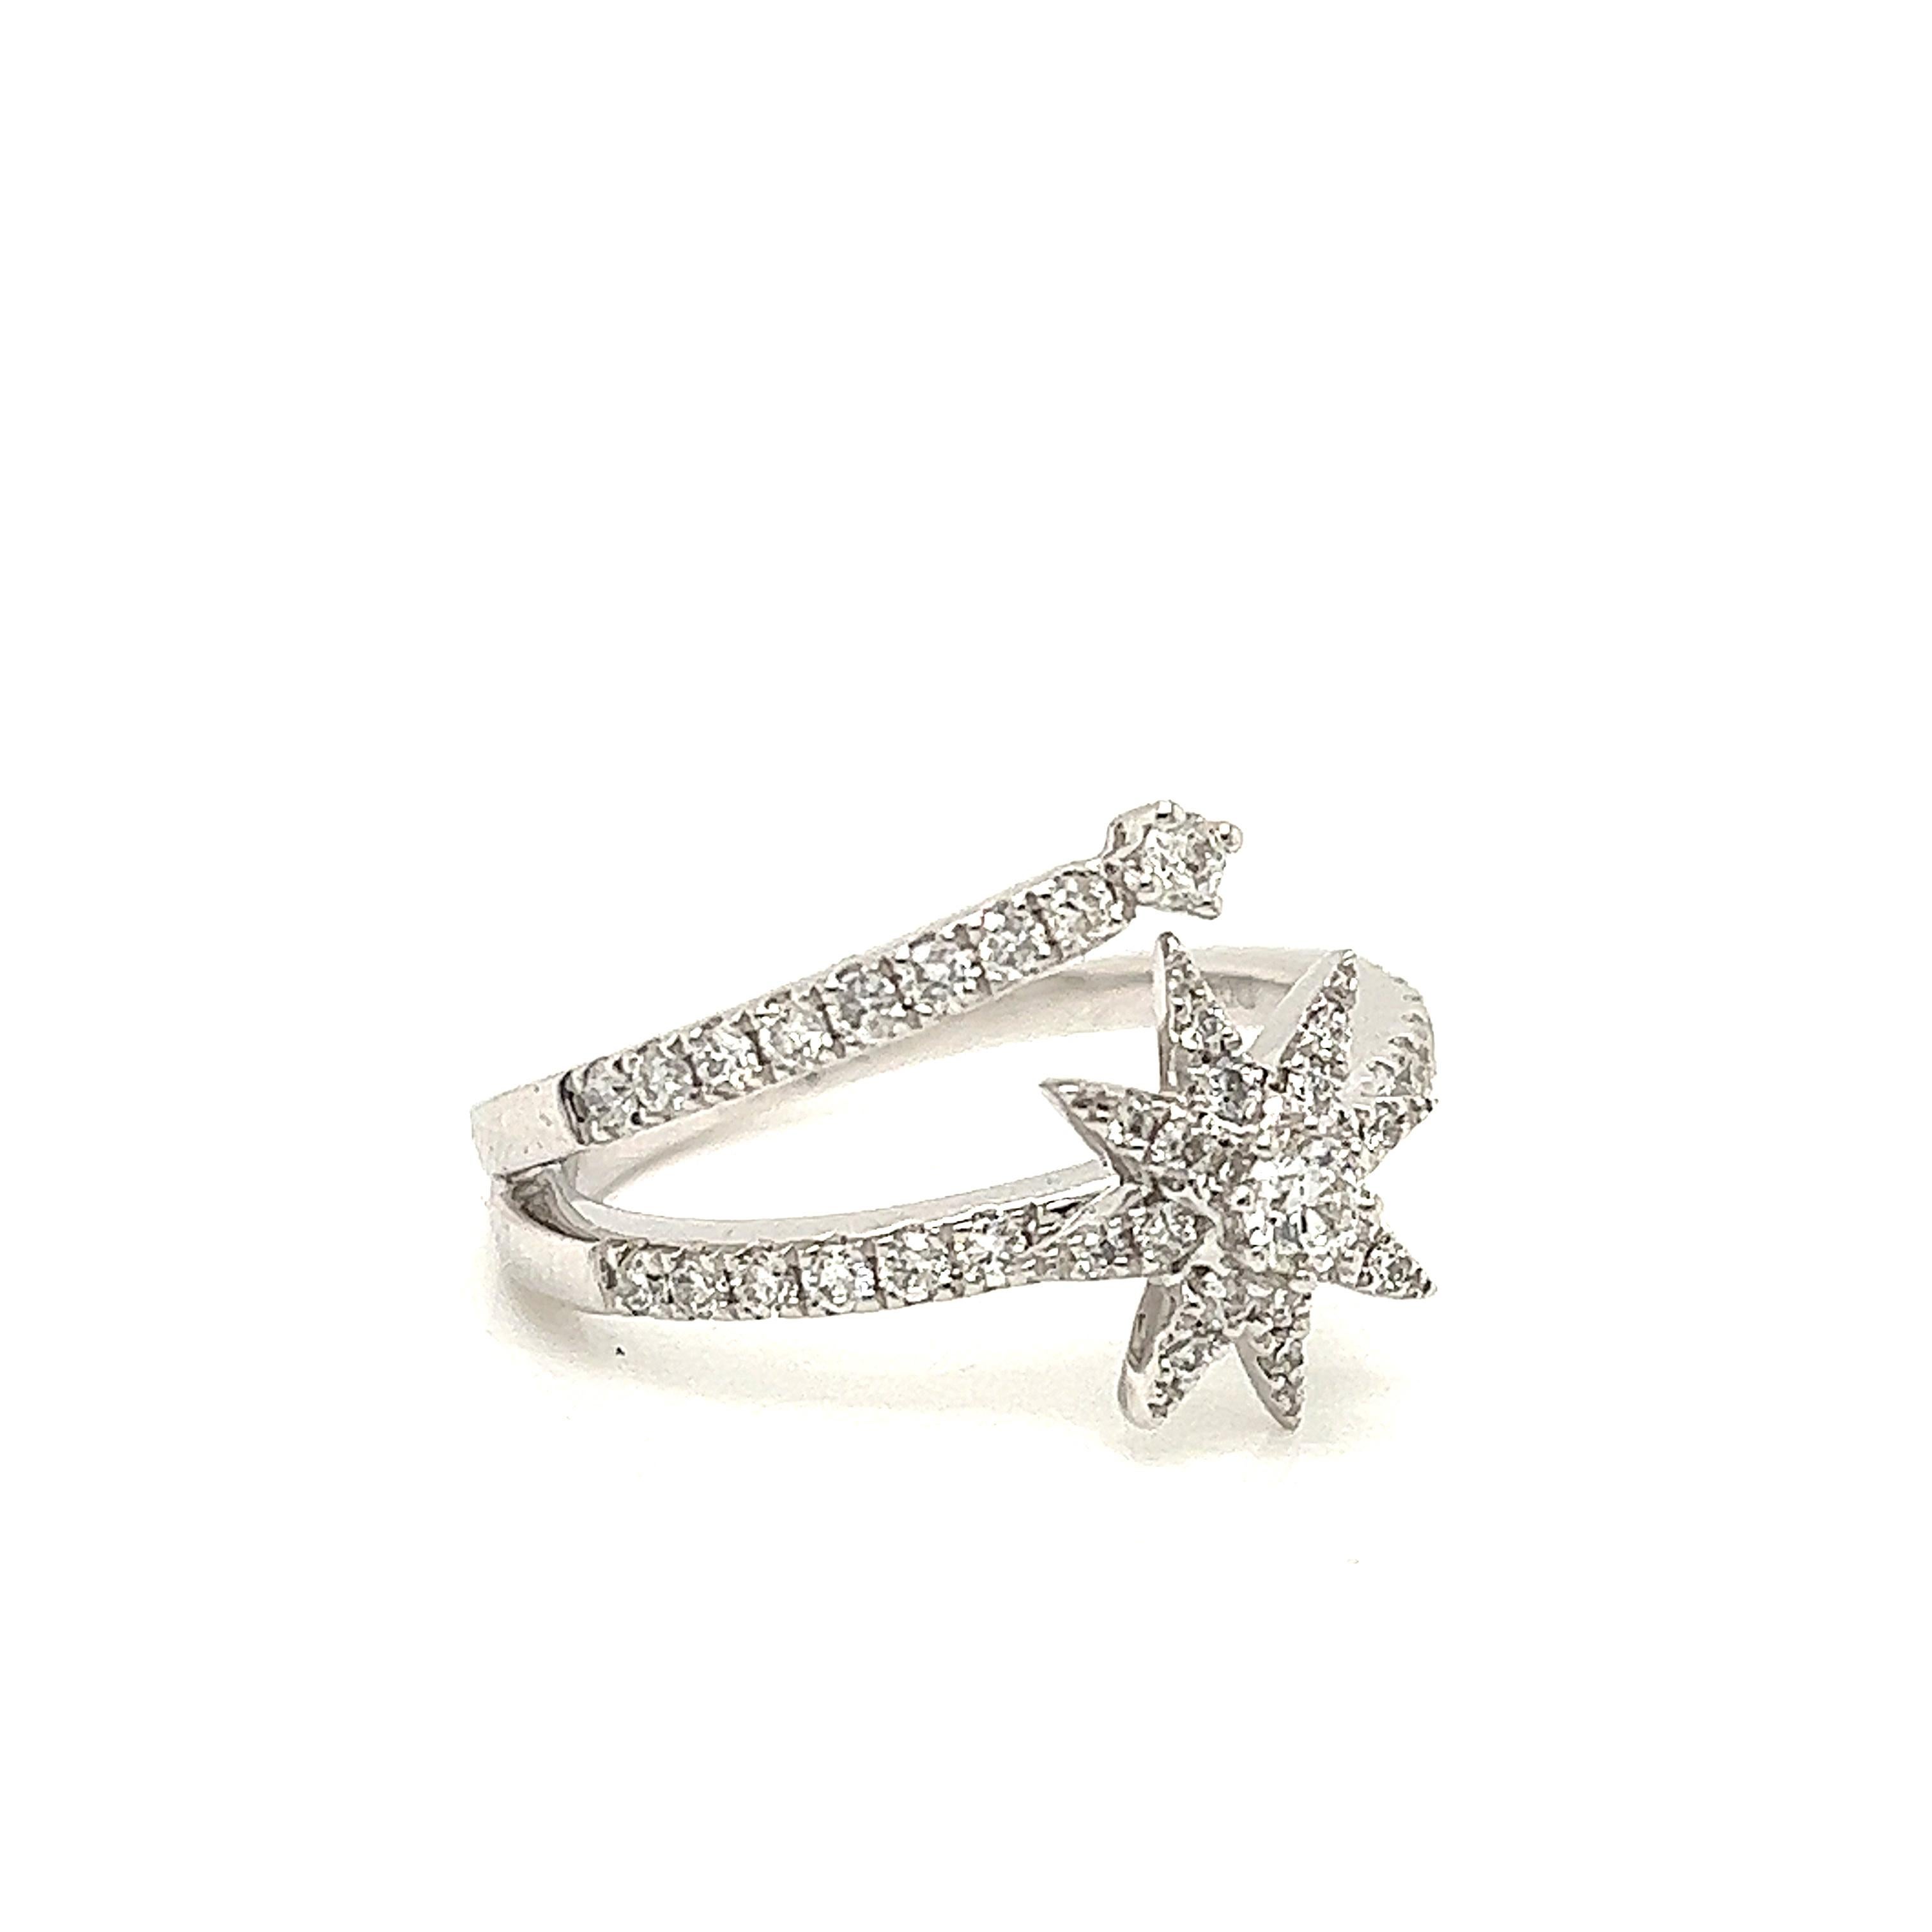 Amazing design crafted in 18k white gold. The ring is set with round brilliant cut natural diamonds that display a beautiful shooting star design. The ring splits to a double band design that truly makes this ring look fantastic on finger. The ring